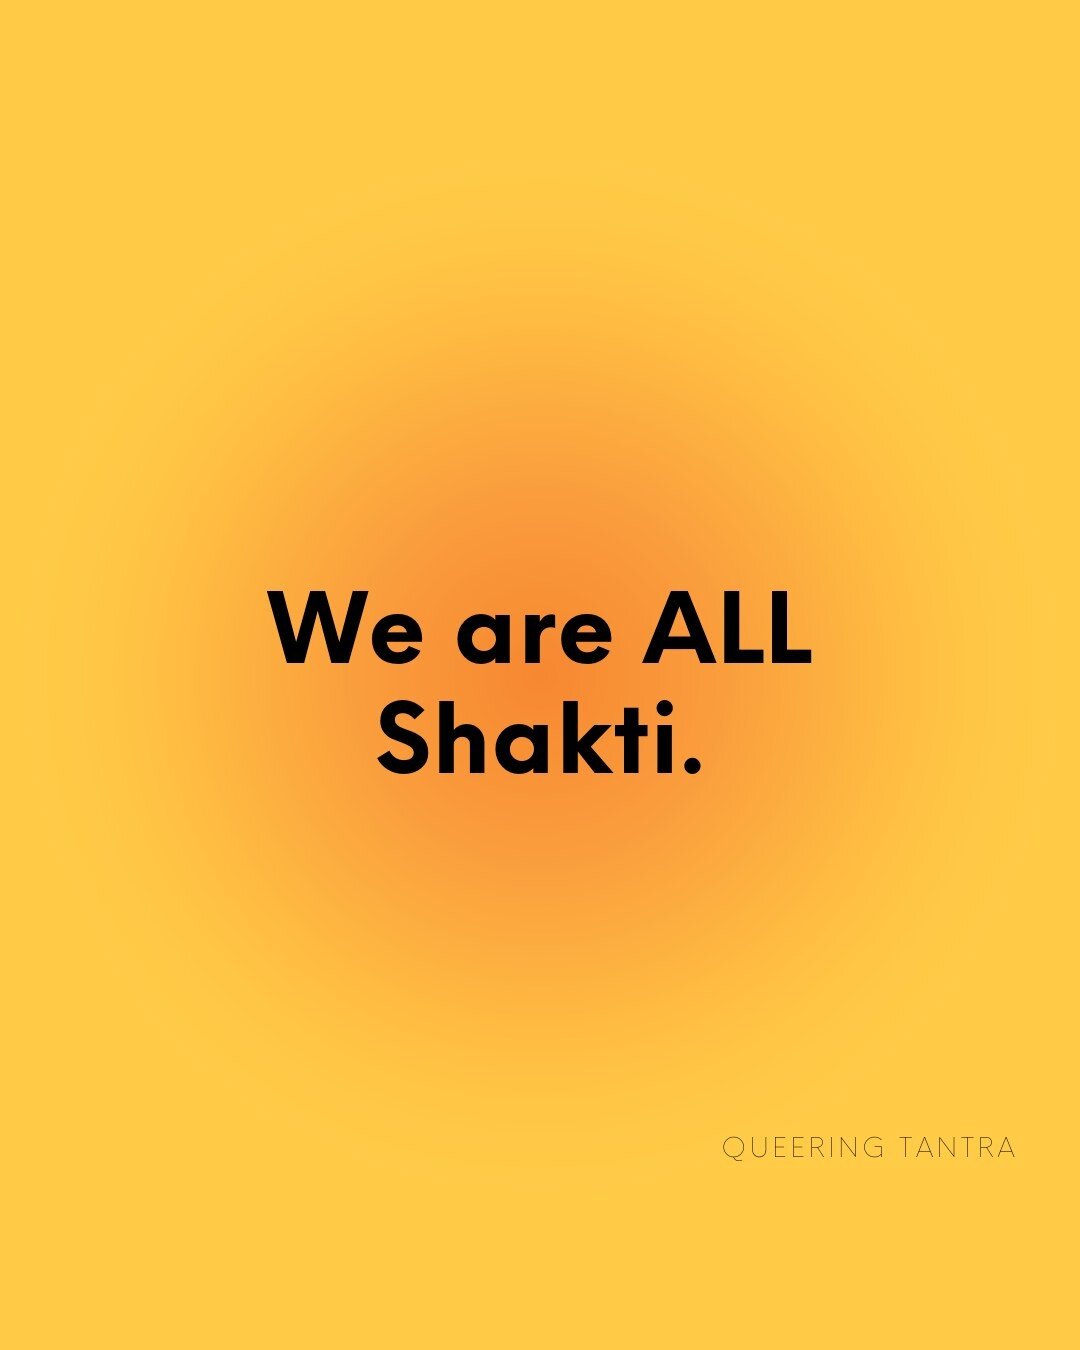 The archetype of Shakti is a principle outside of the human body or gender experience. Shakti is not a woman spirit dancing in the sky. 

The principle of Shakti is one of two components that, according to vedic beliefs, represent the entirety of cre